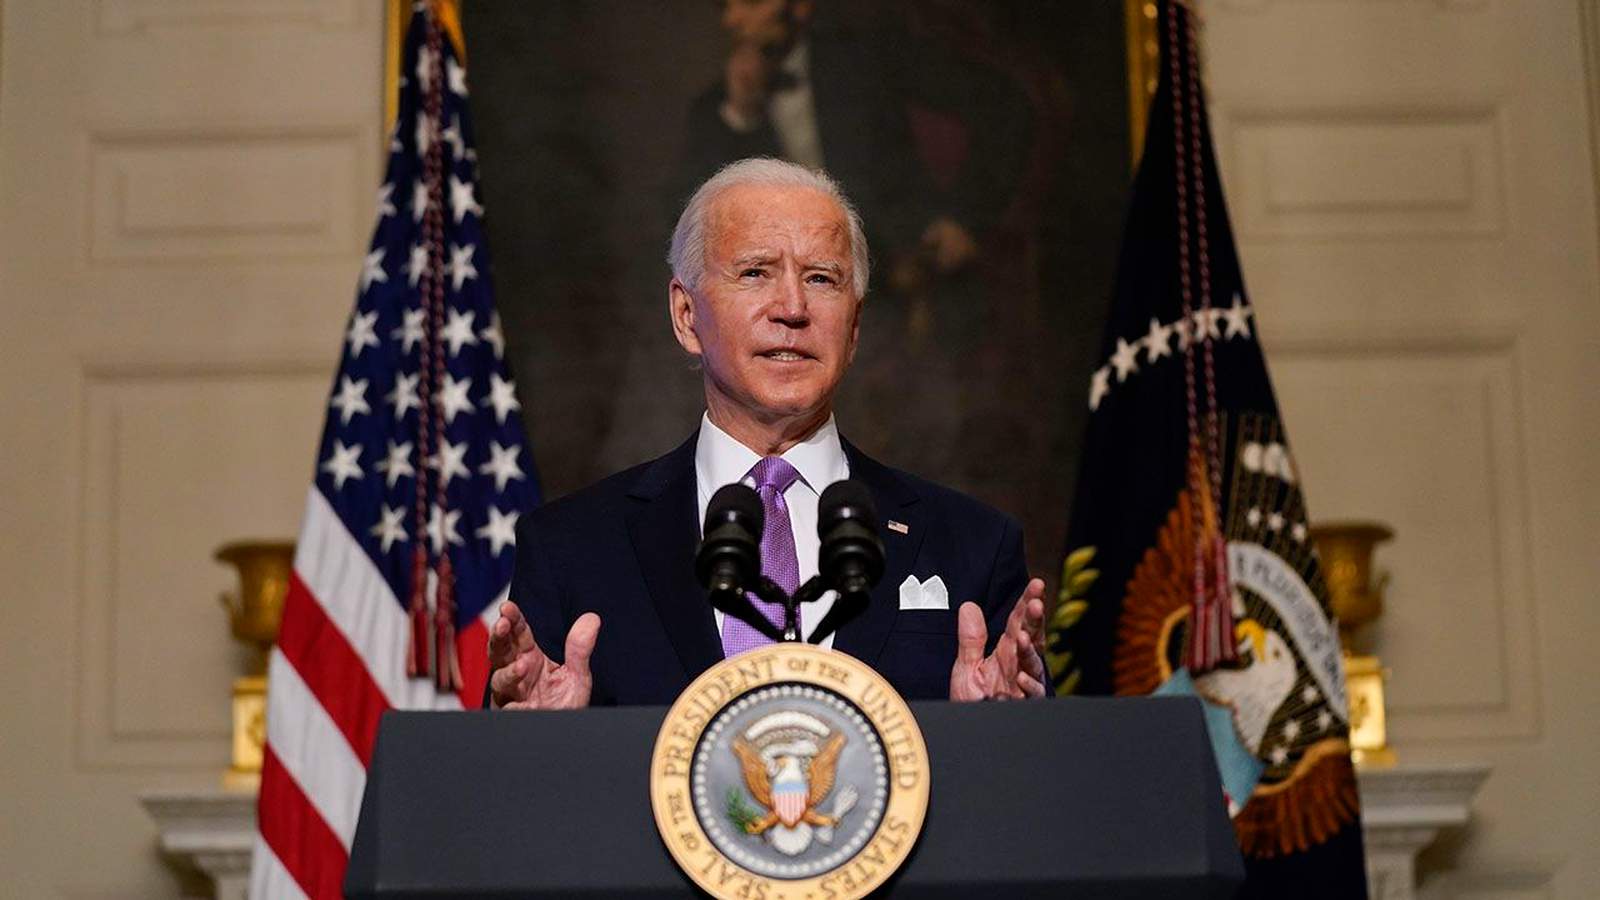 WATCH LIVE: President Biden to sign executive orders tackling climate change